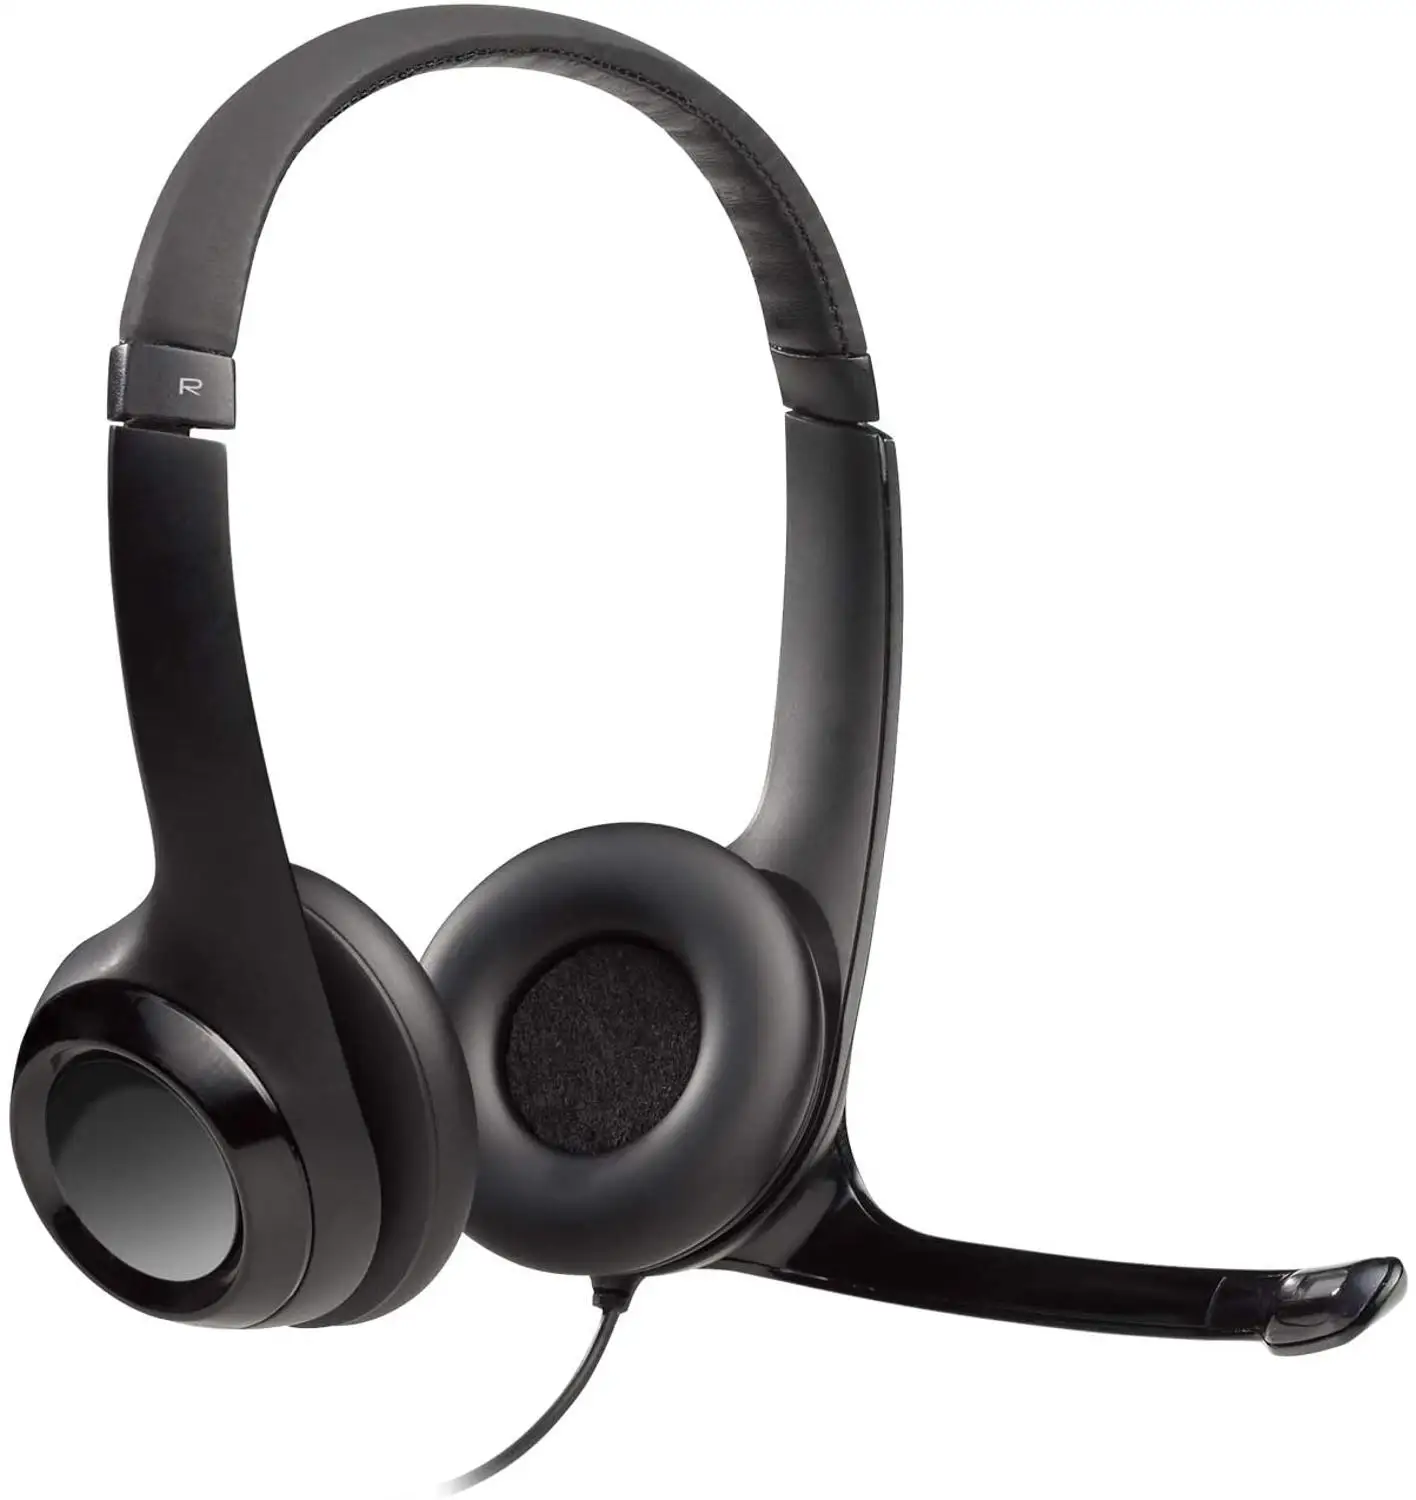 FULL NEW Logitech USB Headset H390 with Noise Cancelling Mic MEETING CLASS LECTURE